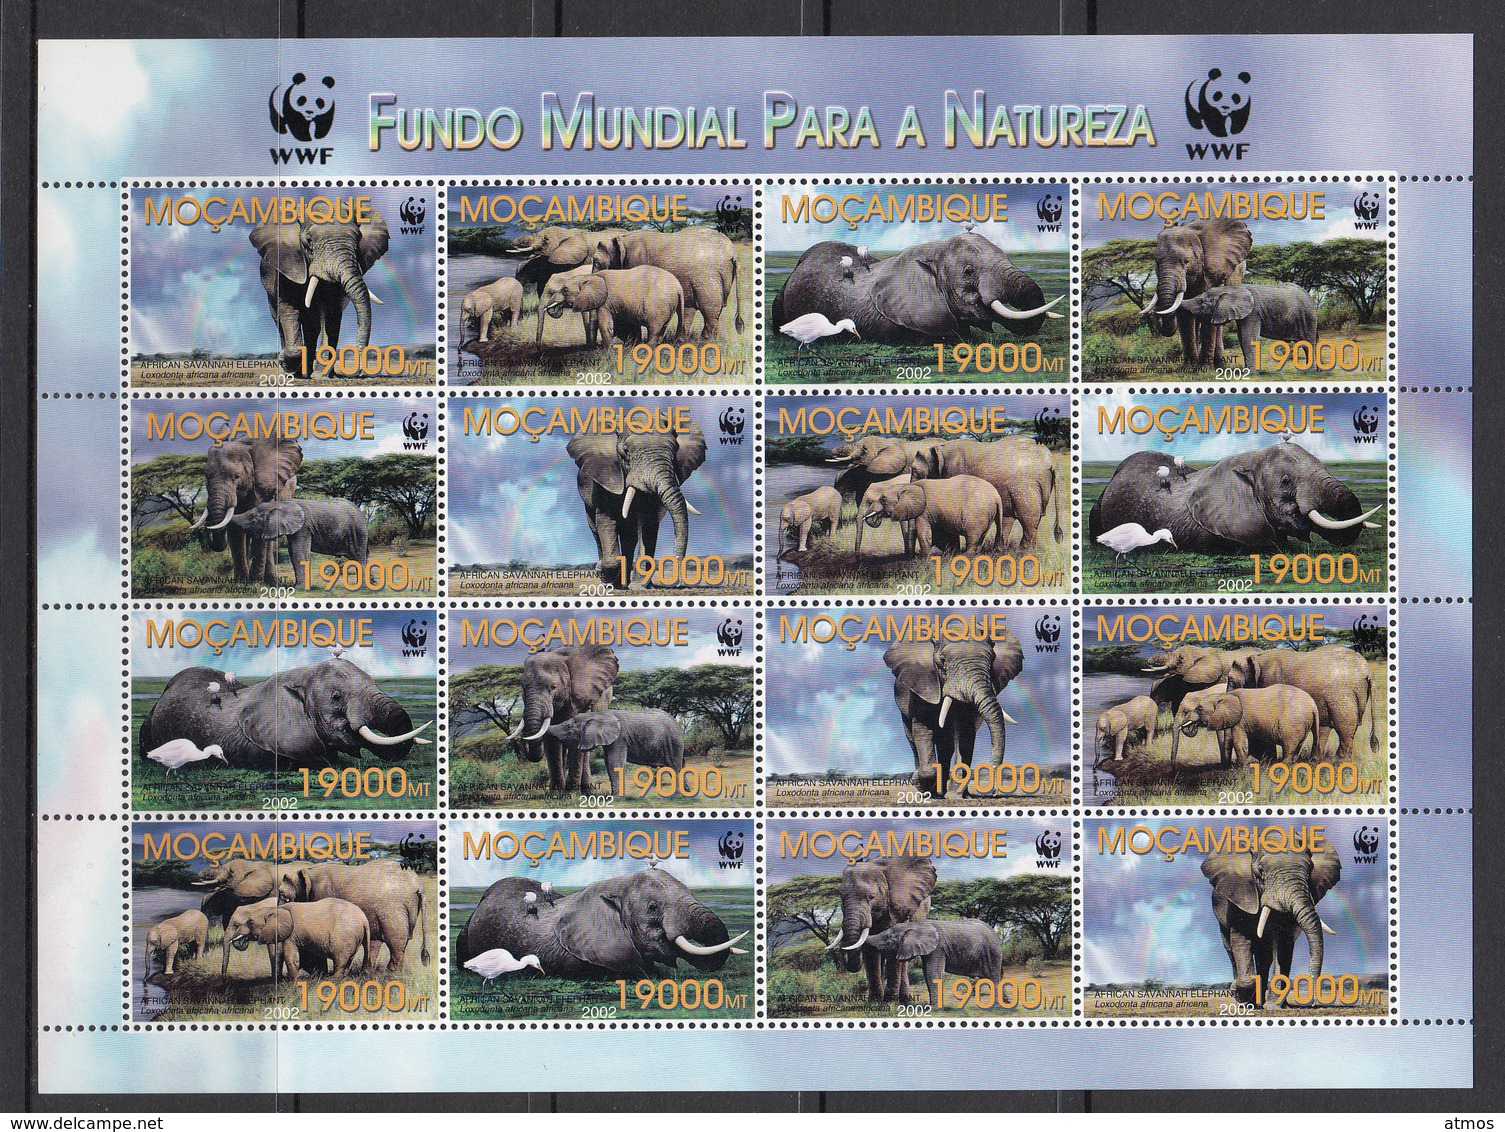 Mozambique MNH Michel Nr 2393/96 From 2002 Sheet WWF / Catw 28.00 EUR - Mozambique